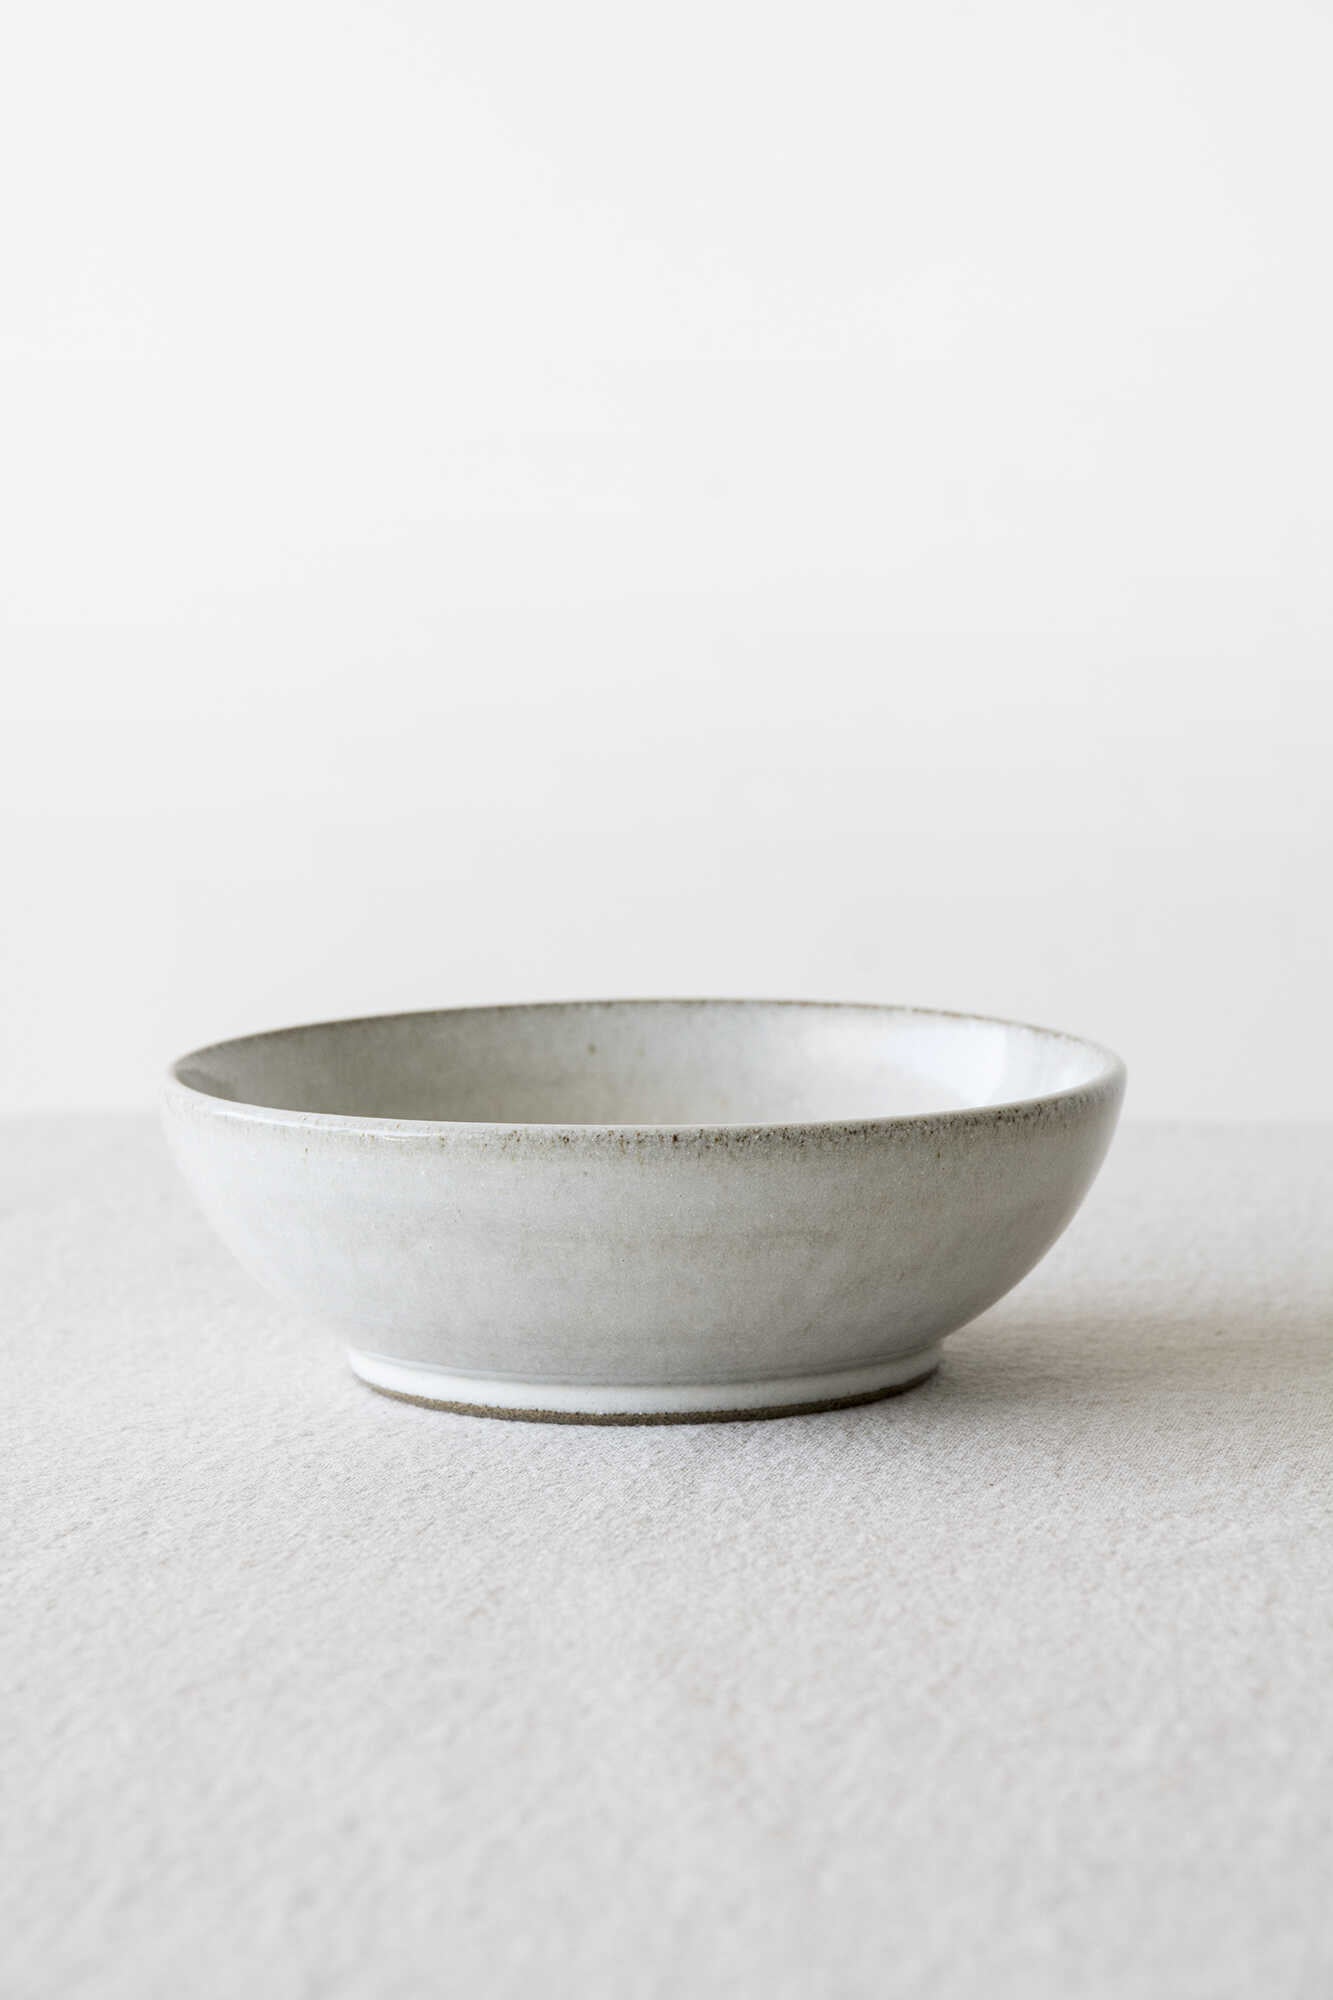 Stackable Ceramic Bowls - Mad About Pottery- Bowl